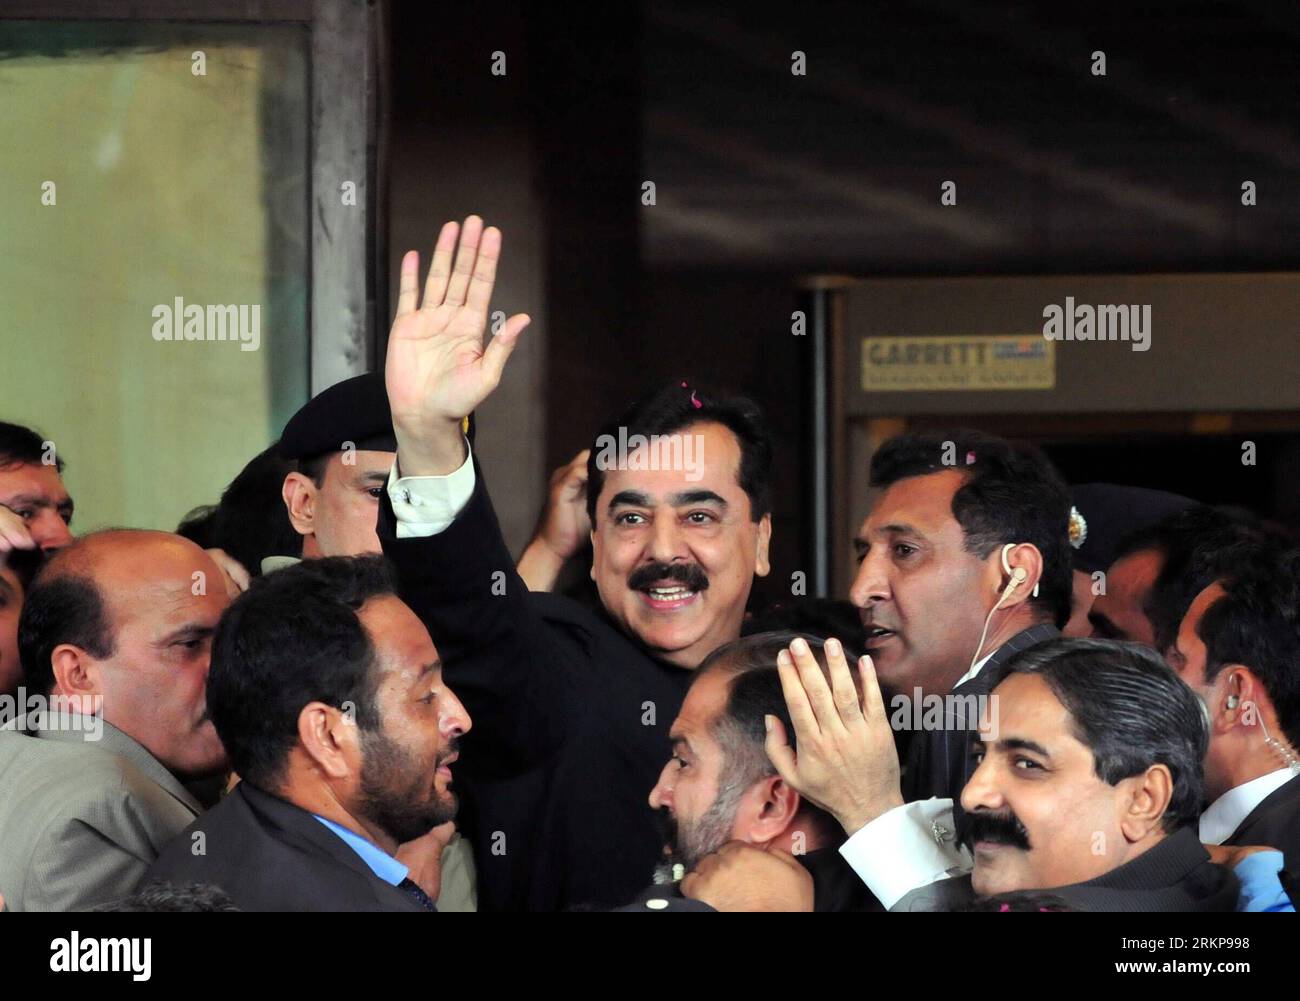 Bildnummer: 57933512  Datum: 26.04.2012  Copyright: imago/Xinhua (120426) -- ISLAMABAD, April 26, 2012 (Xinhua) -- Pakistani Prime Minister Yousuf Raza Gilani (C) is escorted by security members as he waves upon his arrival at the Supreme Court building in Islamabad, capital of Pakistan, on April 26, 2012. Pakistan s Supreme Court on Thursday found Prime Minister Yusuf Raza Gilani guilty of contempt of court for failing to act on its directives to reopen graft cases against President Asif Ali Zardari. (Xinhua/Ahmad Kamal) (lyx) PAKISTAN-PRIME MINISTER-GUILTY OF CONTEMPT OF COURT PUBLICATIONxNO Stock Photo